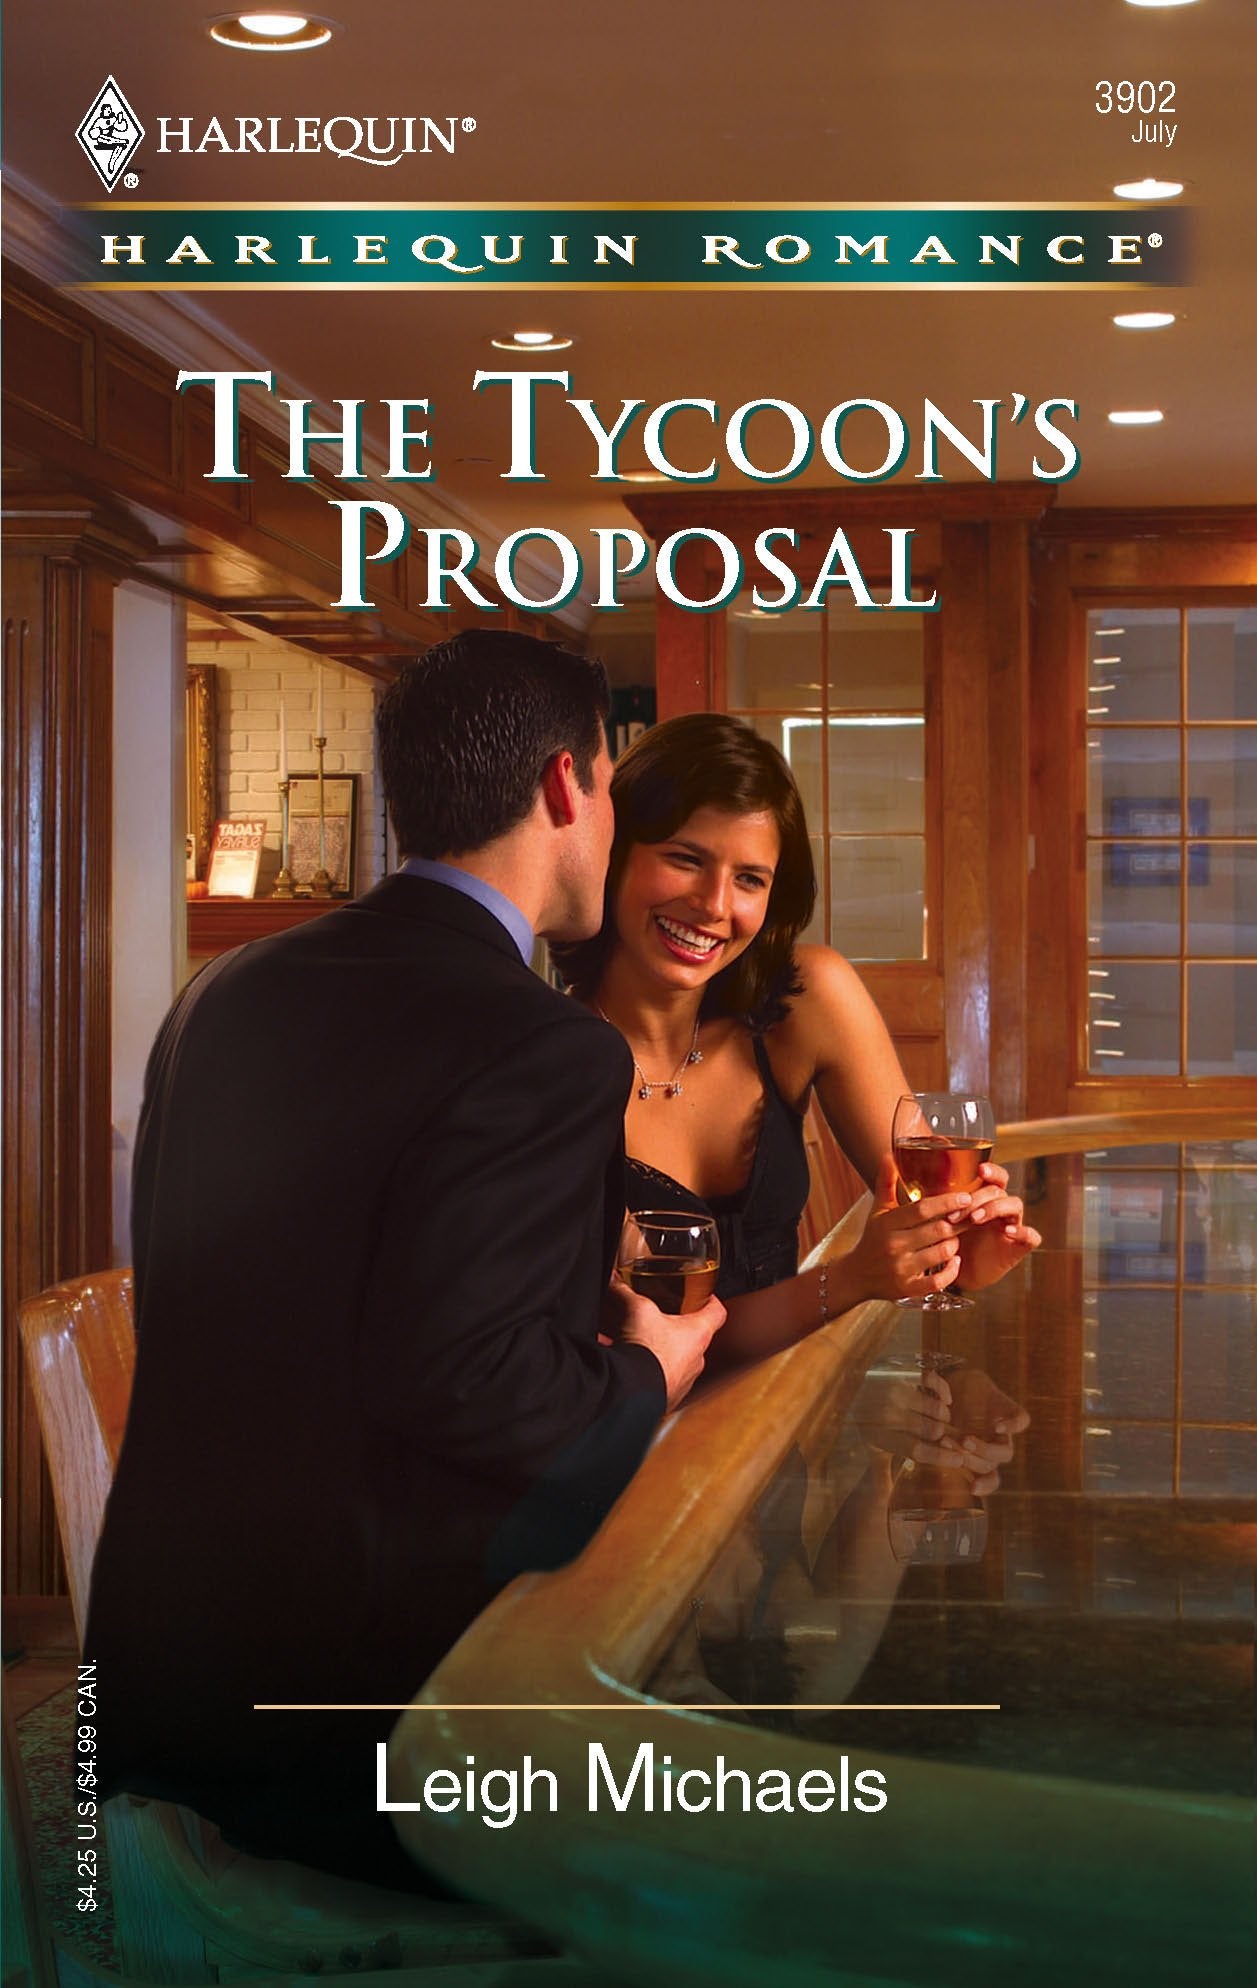 Harlequin Romance : The Tycoon's Proposal - Leigh Michaels